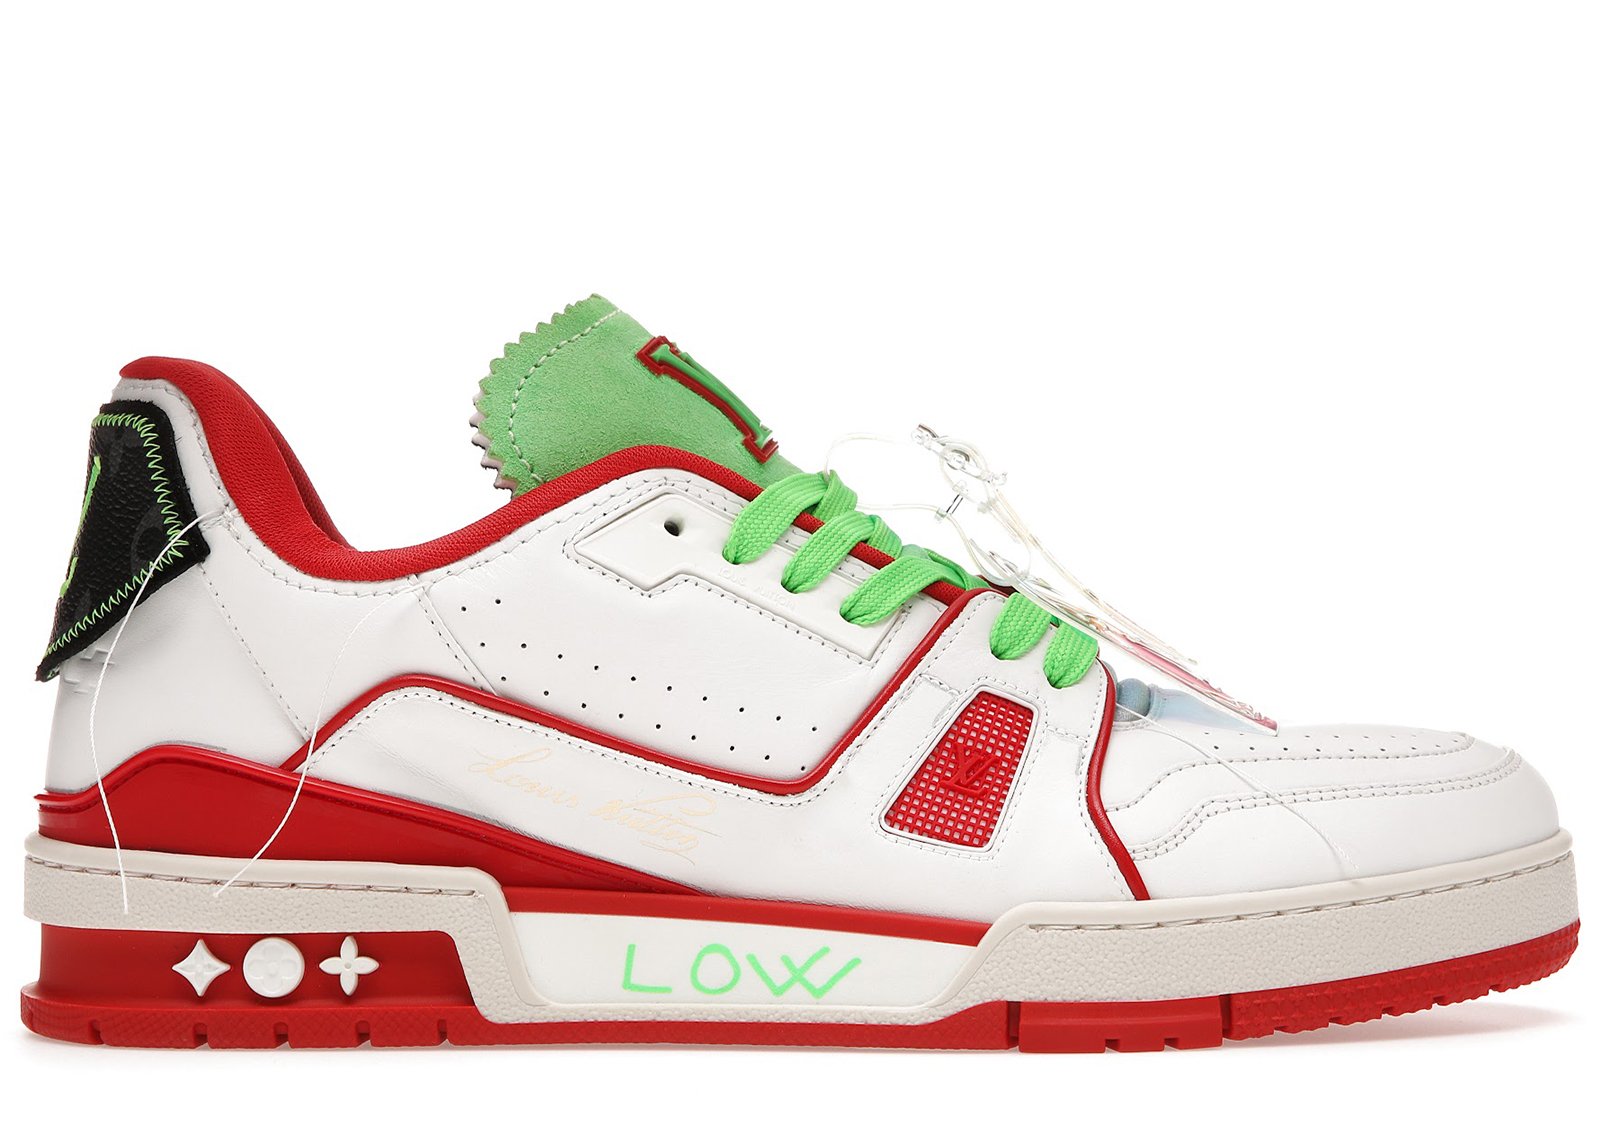 Louis Vuitton Trainer Neon Red sneakers